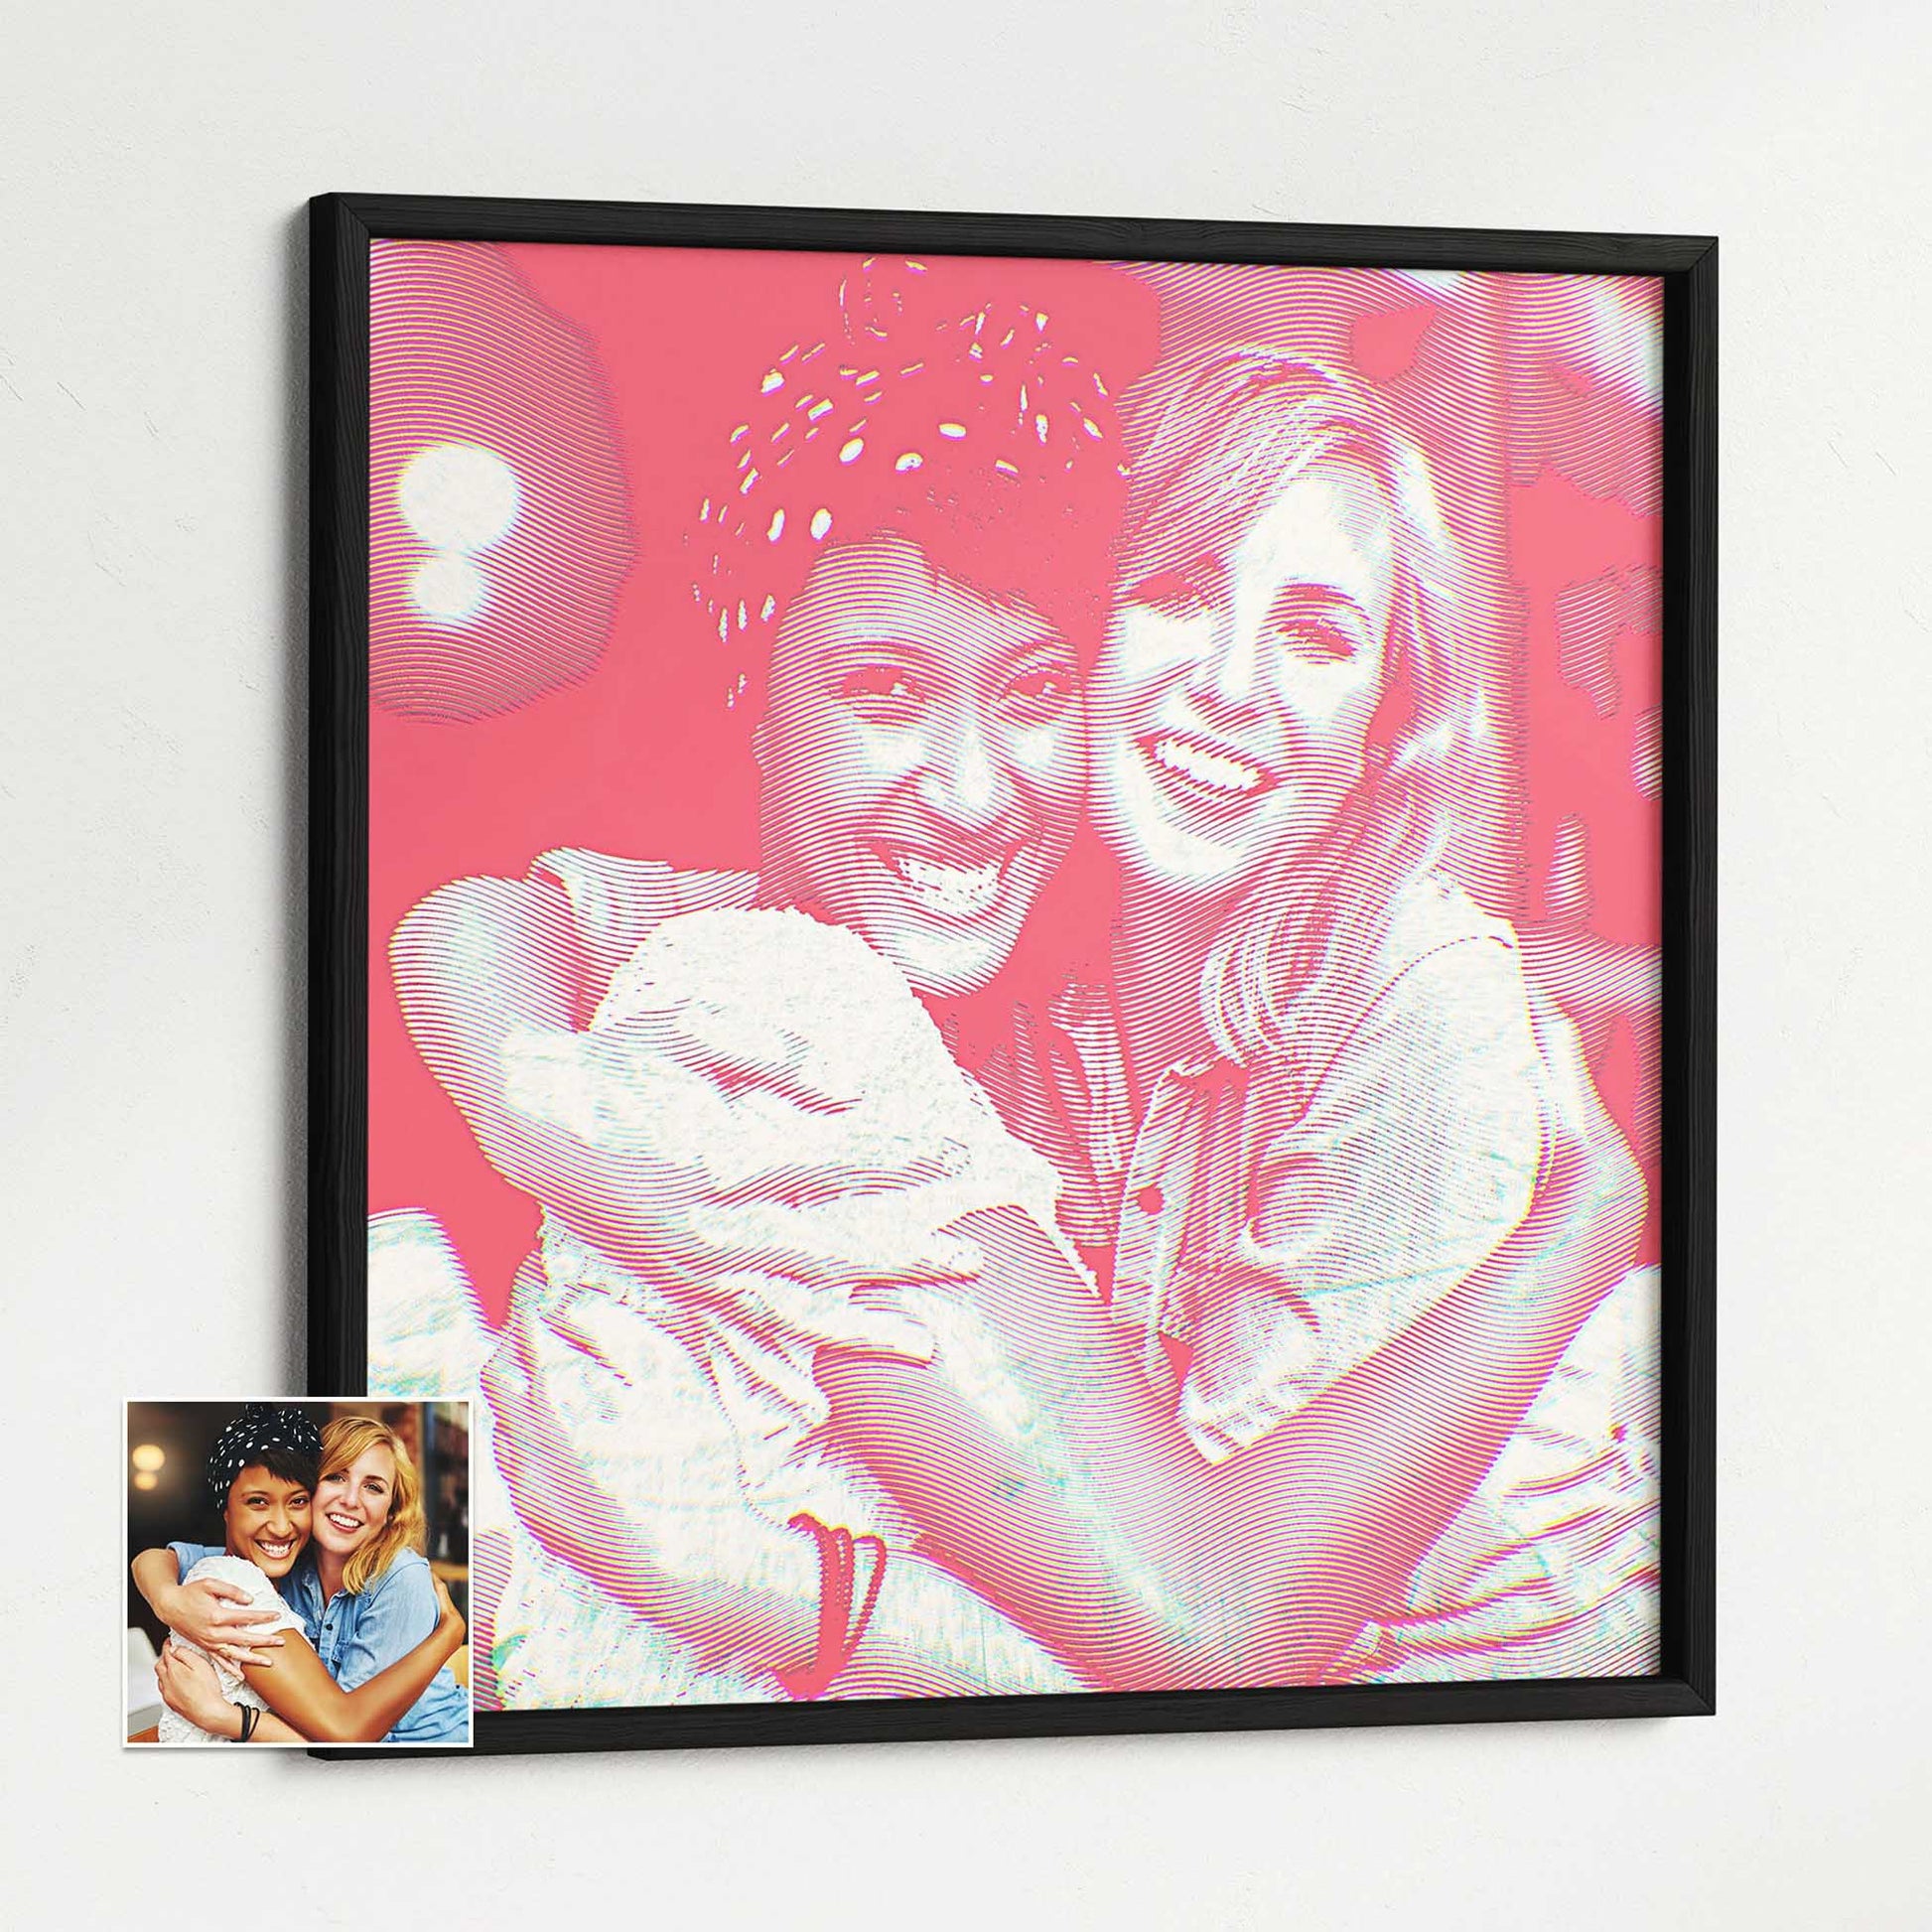 Transform your favorite photo into an elegant Personalised Pink Engraving Framed Print. The engraving effect adds a modern and contemporary style, making it a cool and unique addition to your home decor, made to order